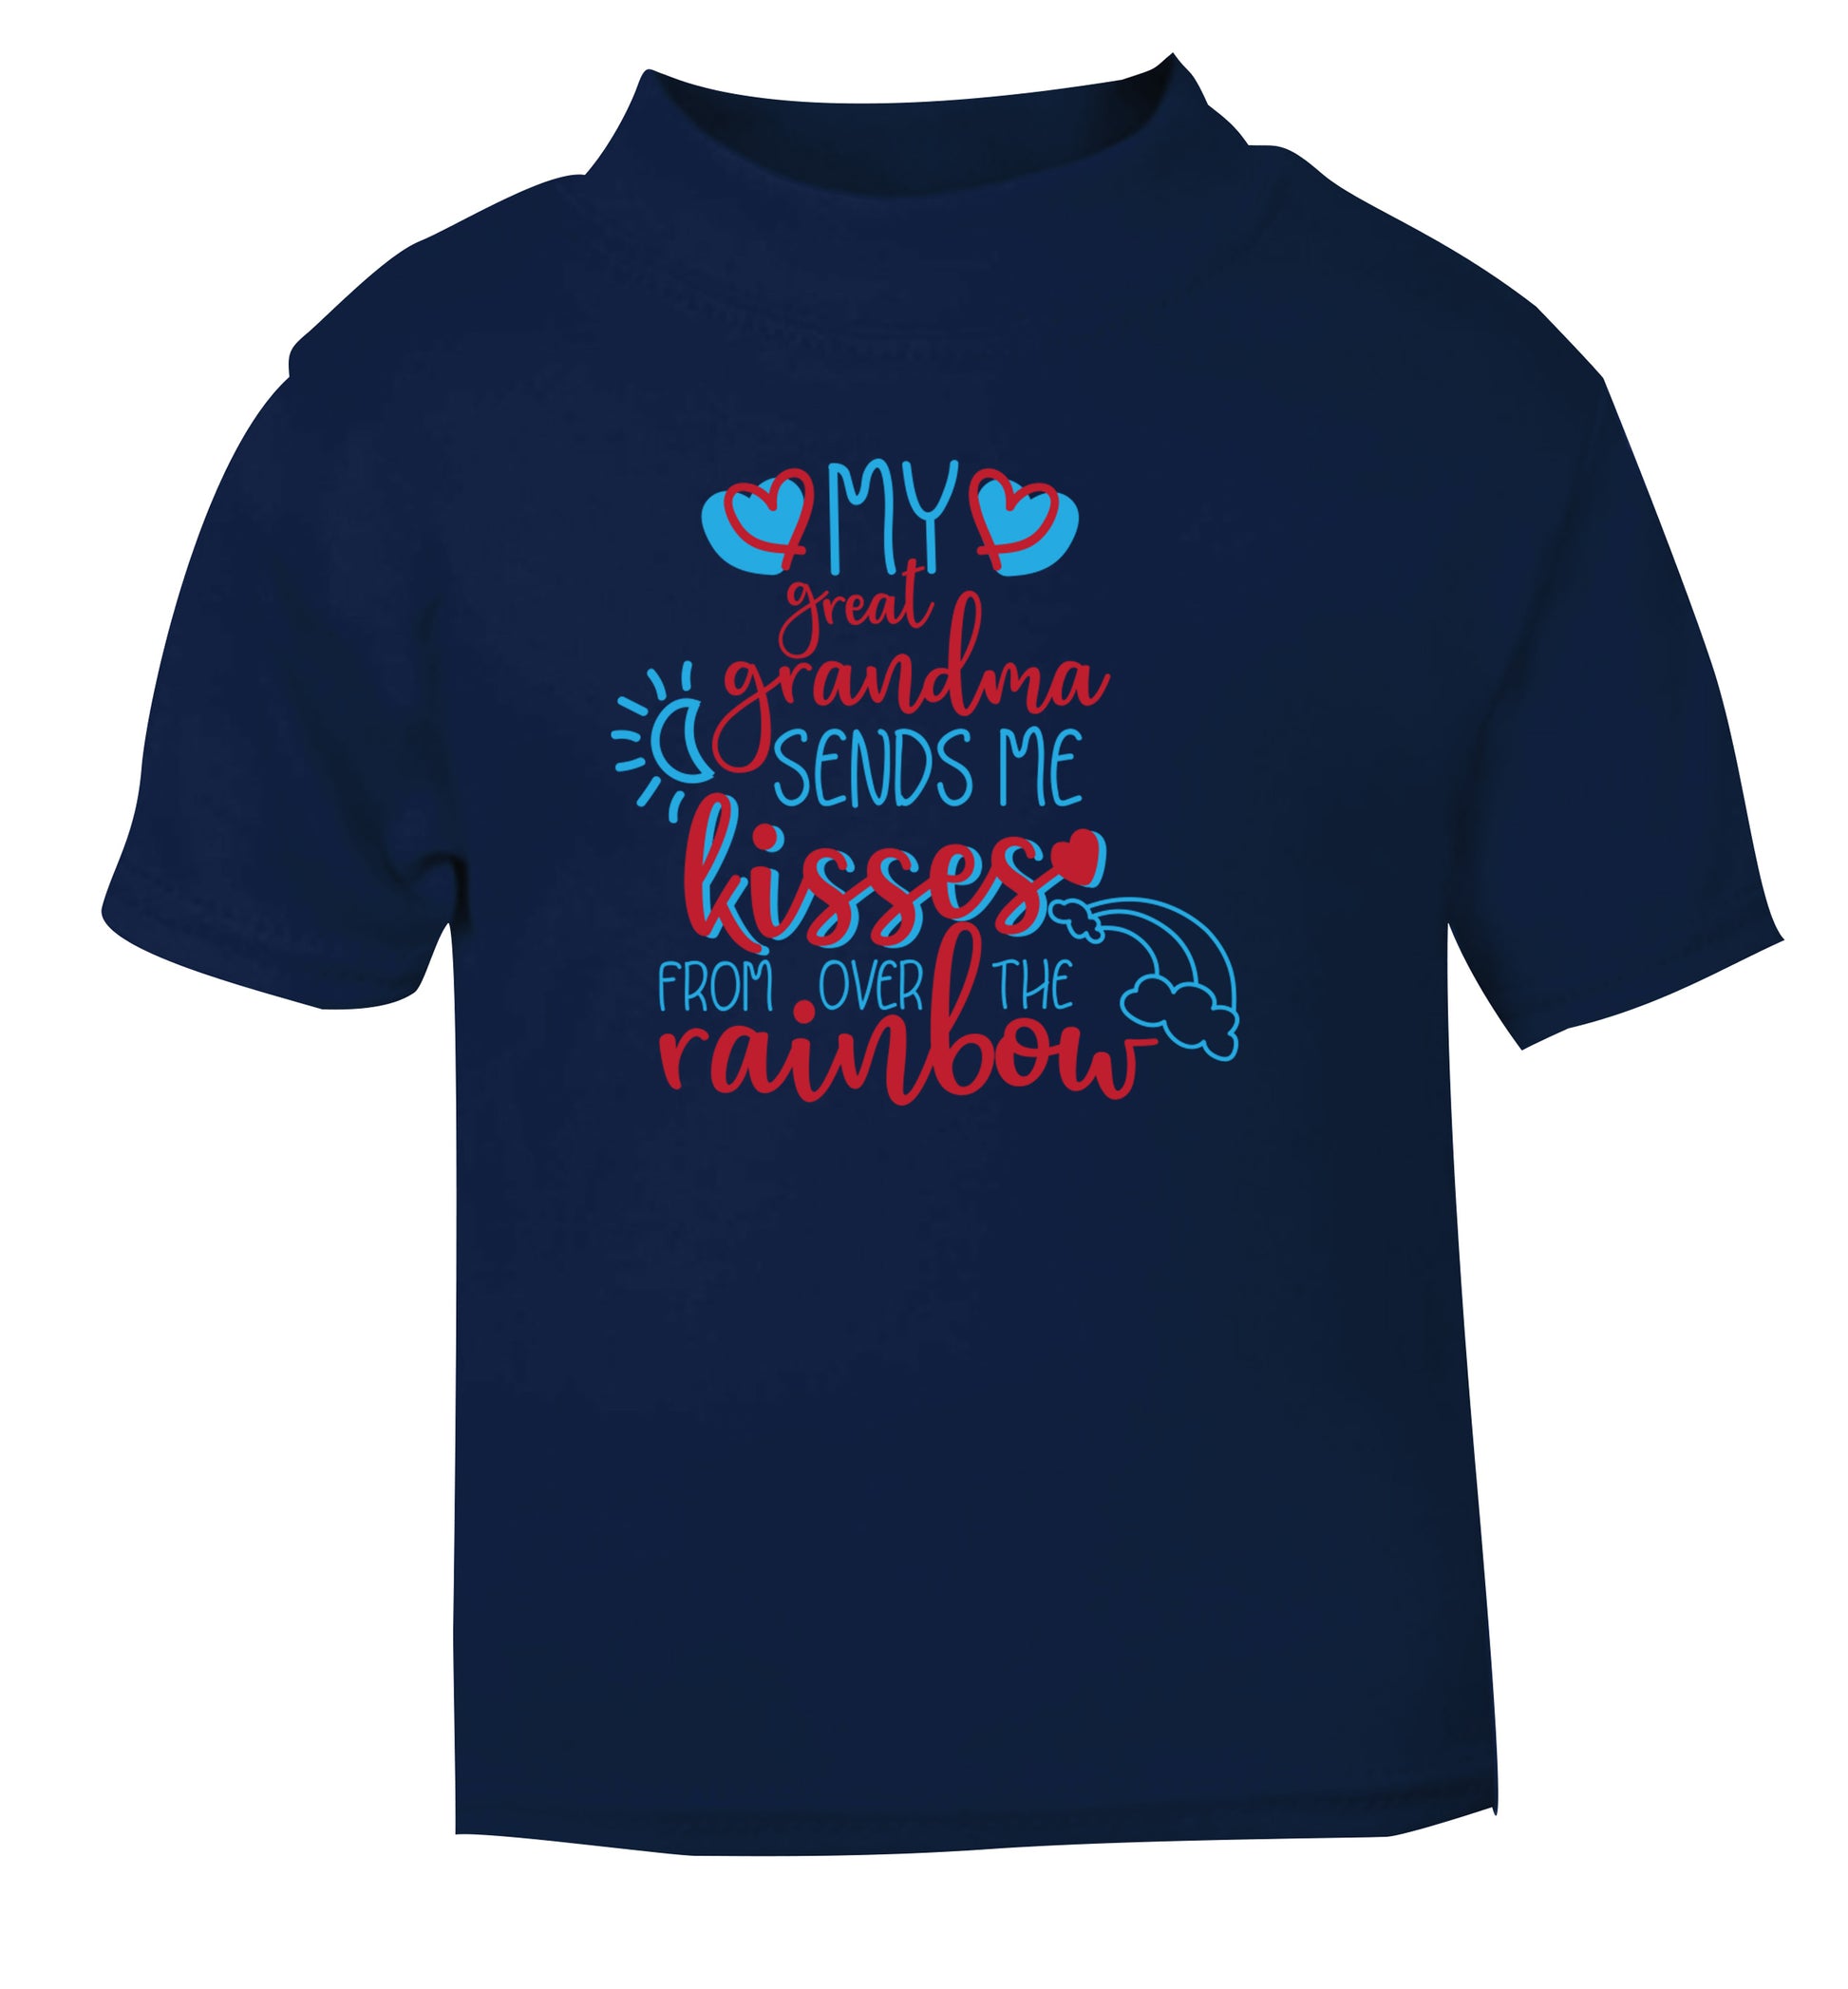 My great grandma sends me kisses from over the rainbow navy Baby Toddler Tshirt 2 Years